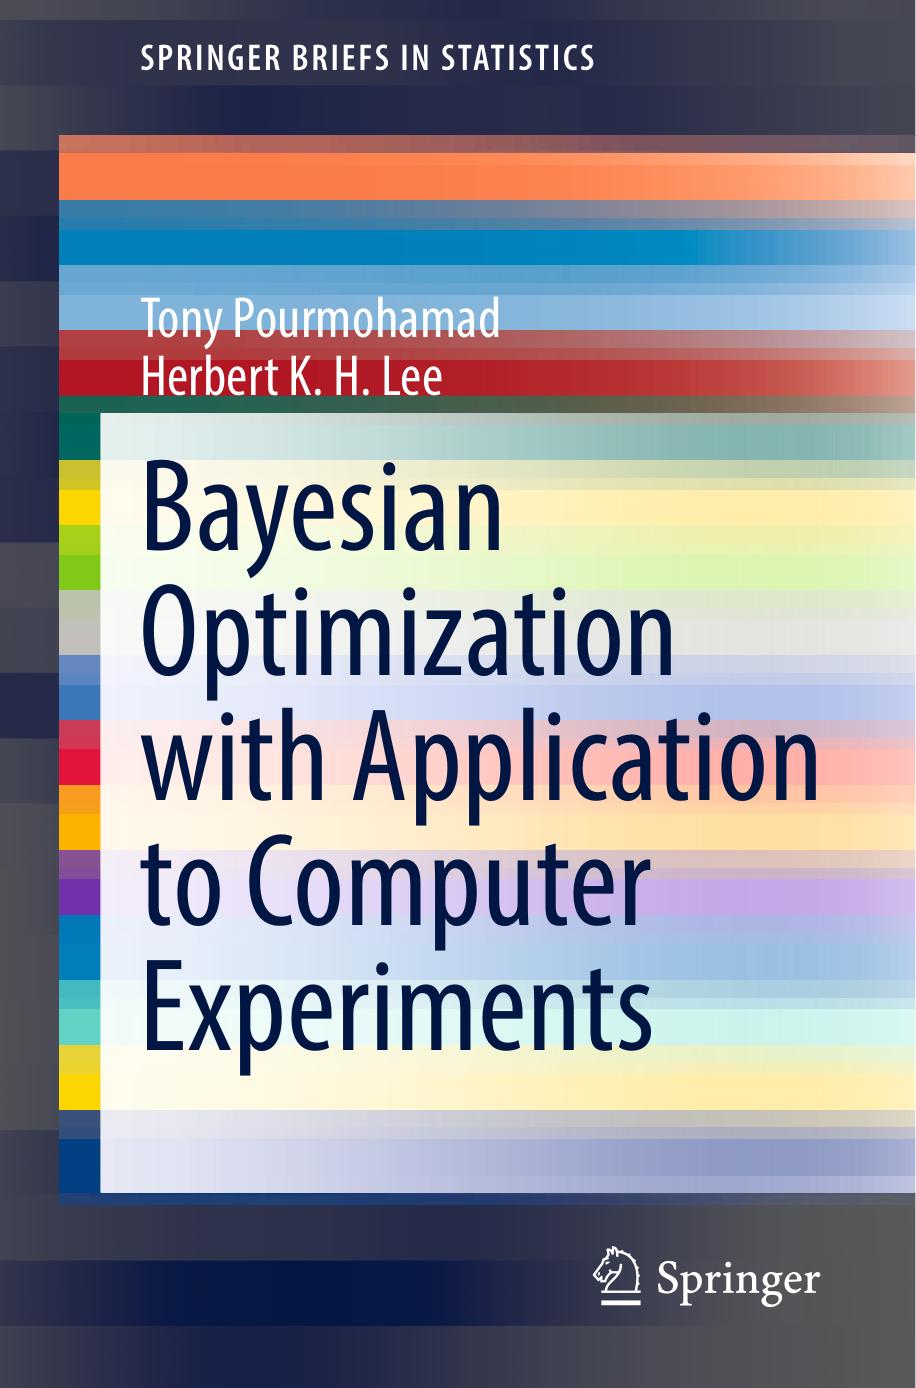 Bayesian Optimization with Application to Computer Experiments (SpringerBriefs in Statistics) by Tony Pourmohamad